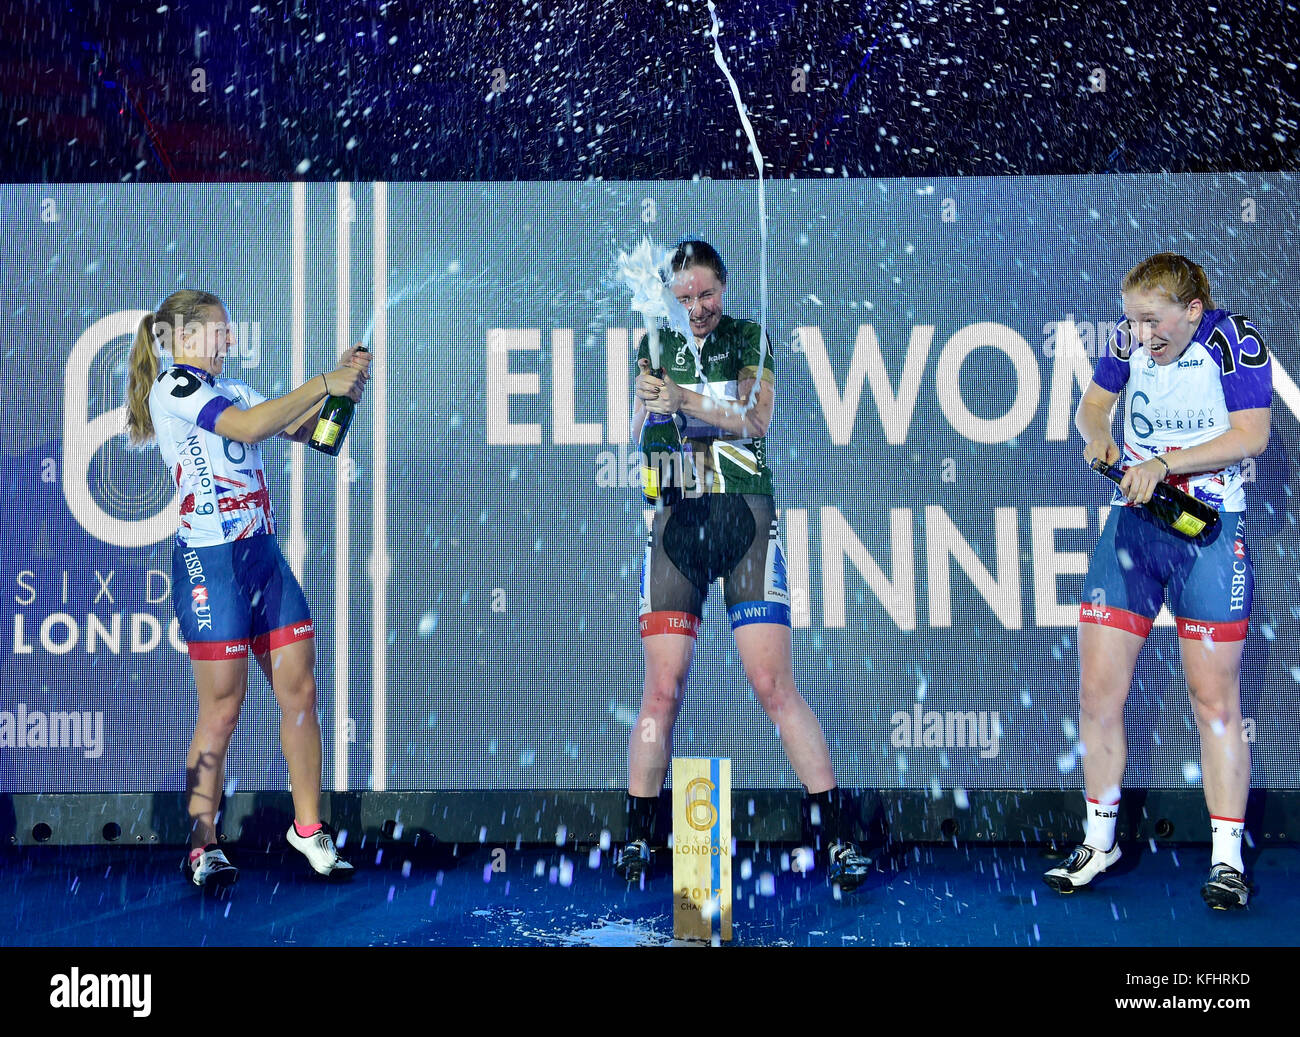 London, UK. 29th Oct, 2017. Rebecca Raybould (GBR), Neah Evans (GBR) and Emily Nelson (GBR) at the Women's Winner Presentation  during Six Day London on Day 6 event on Sunday, 29 October 2017, London England. Credit: Taka Wu/Alamy Live News Stock Photo